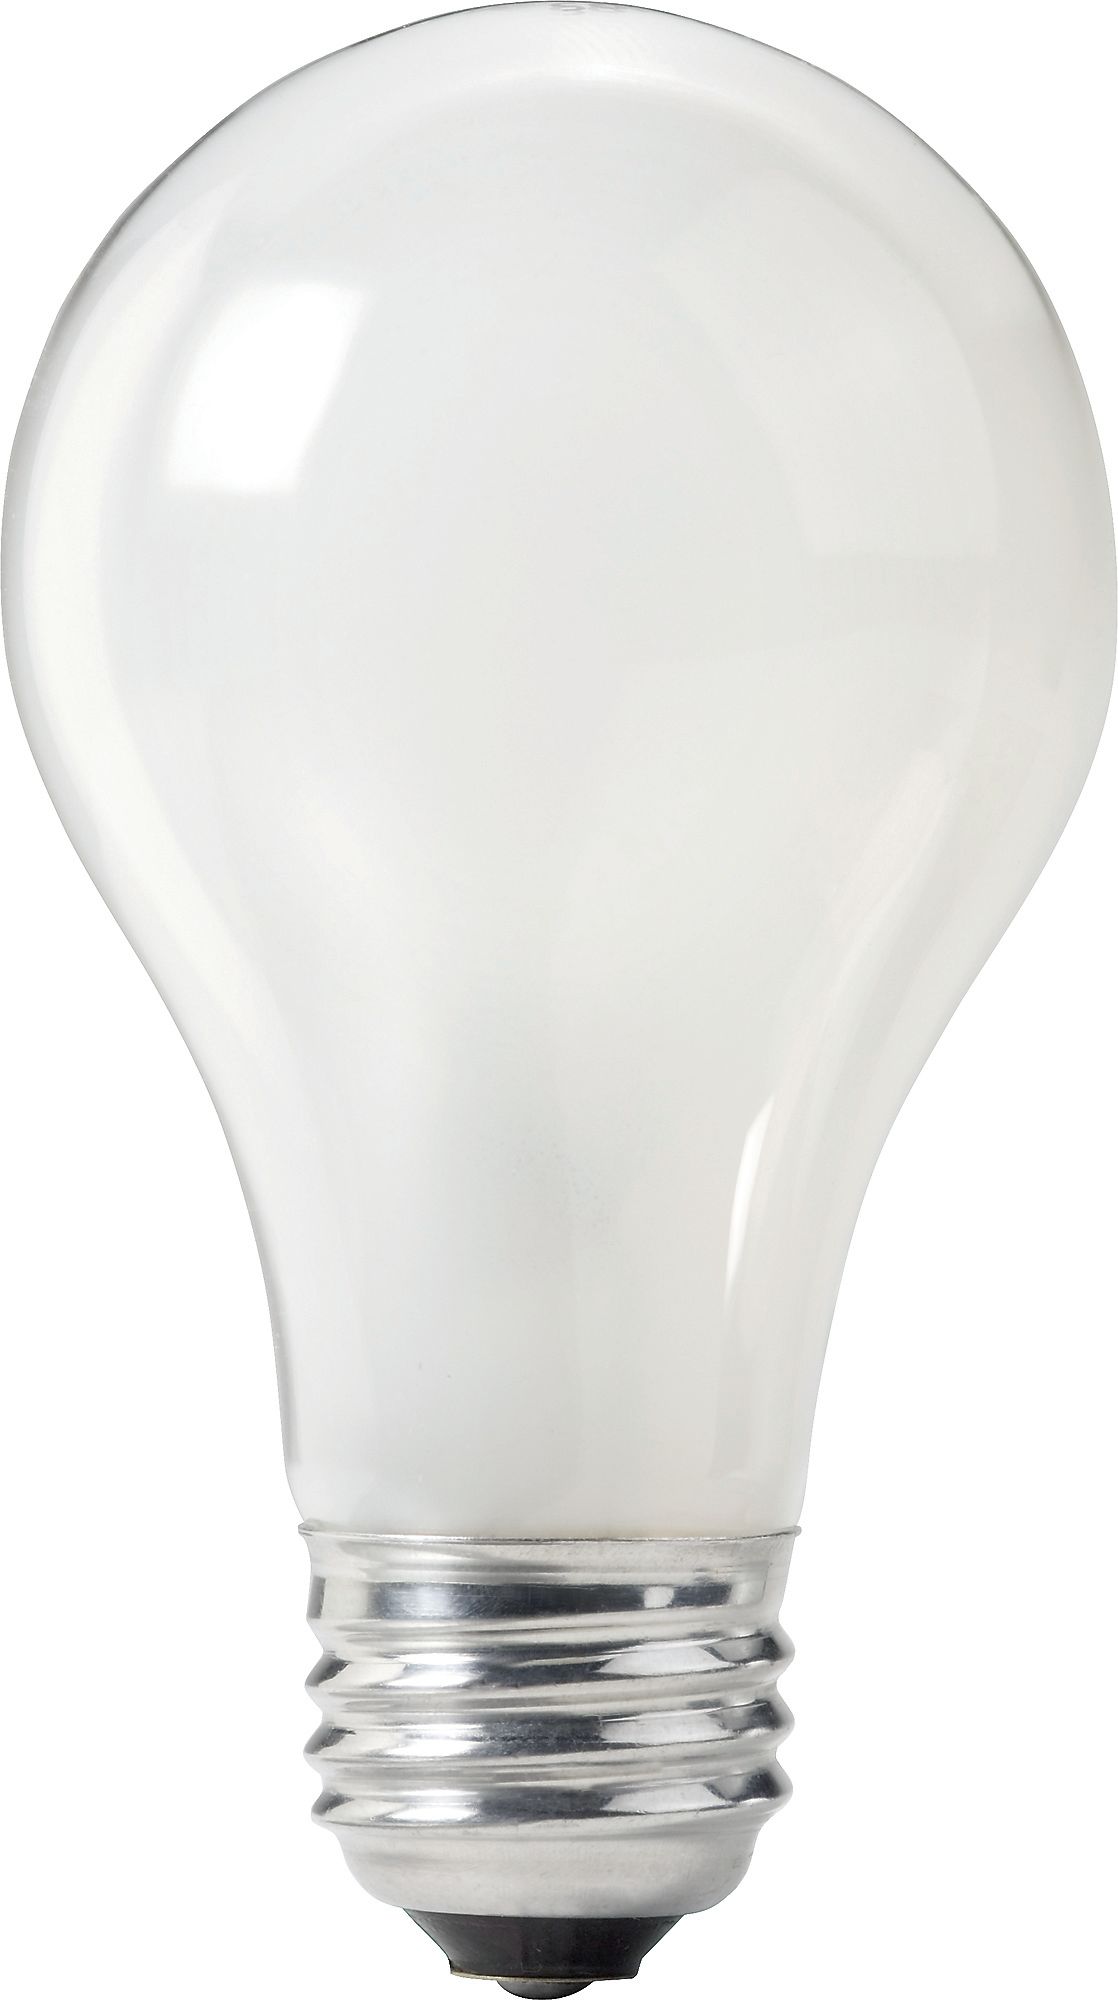 14979-9 (60A/TF) Coated Incandescent Lamp Philips Lighting;Signify Lamps